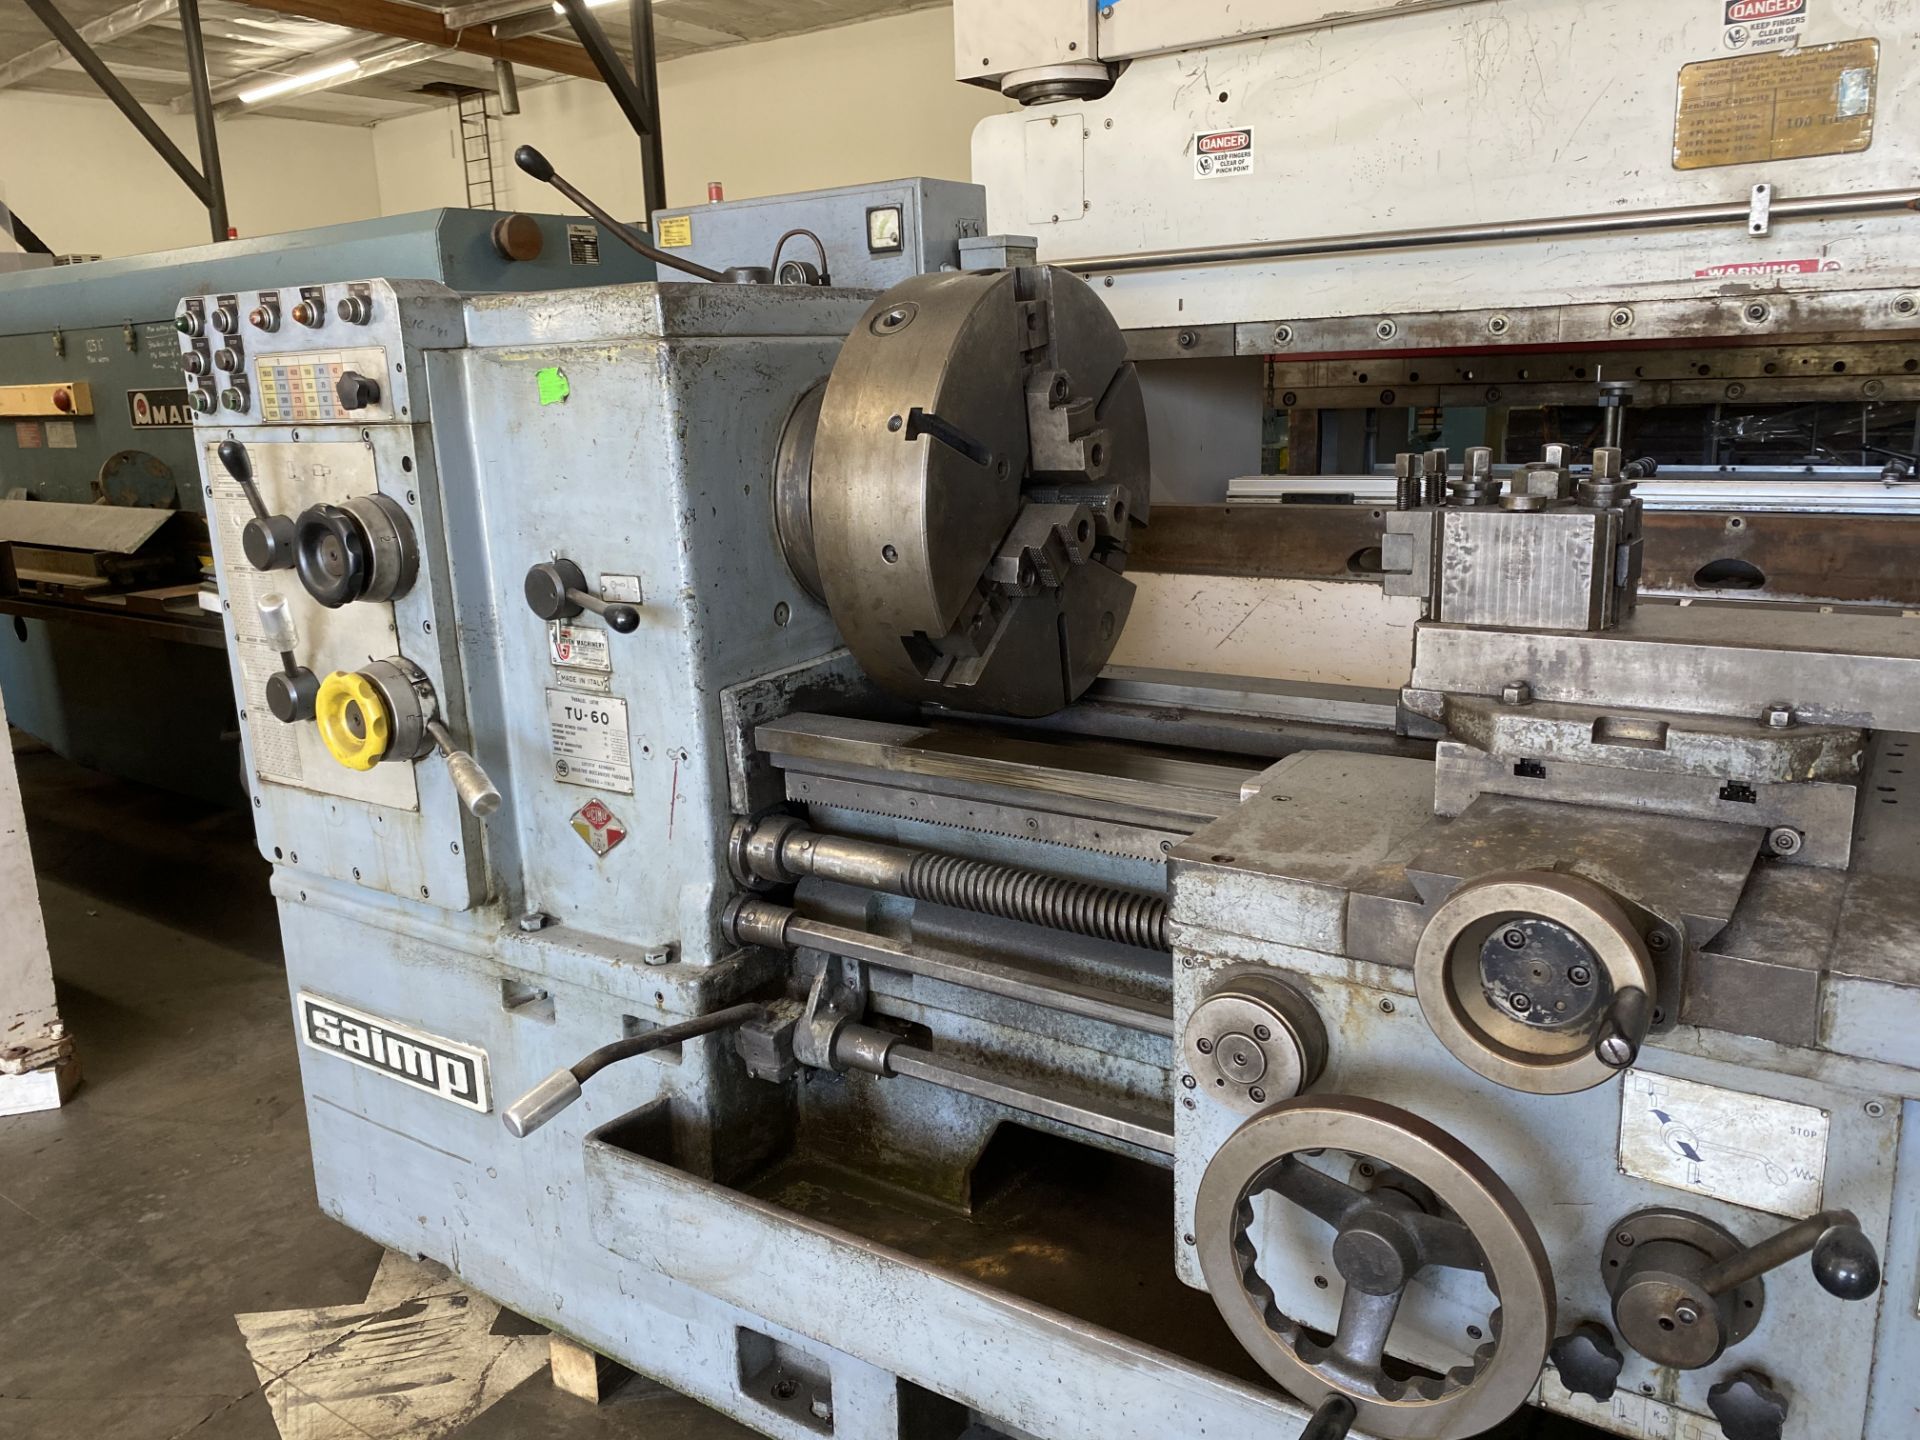 Saimp TU-60 24” x 80” Engine Lathe s/n 1096 w/ 24-1800 RPM, Inch/mm Threading, 3” SOLD AS IS - Image 2 of 10